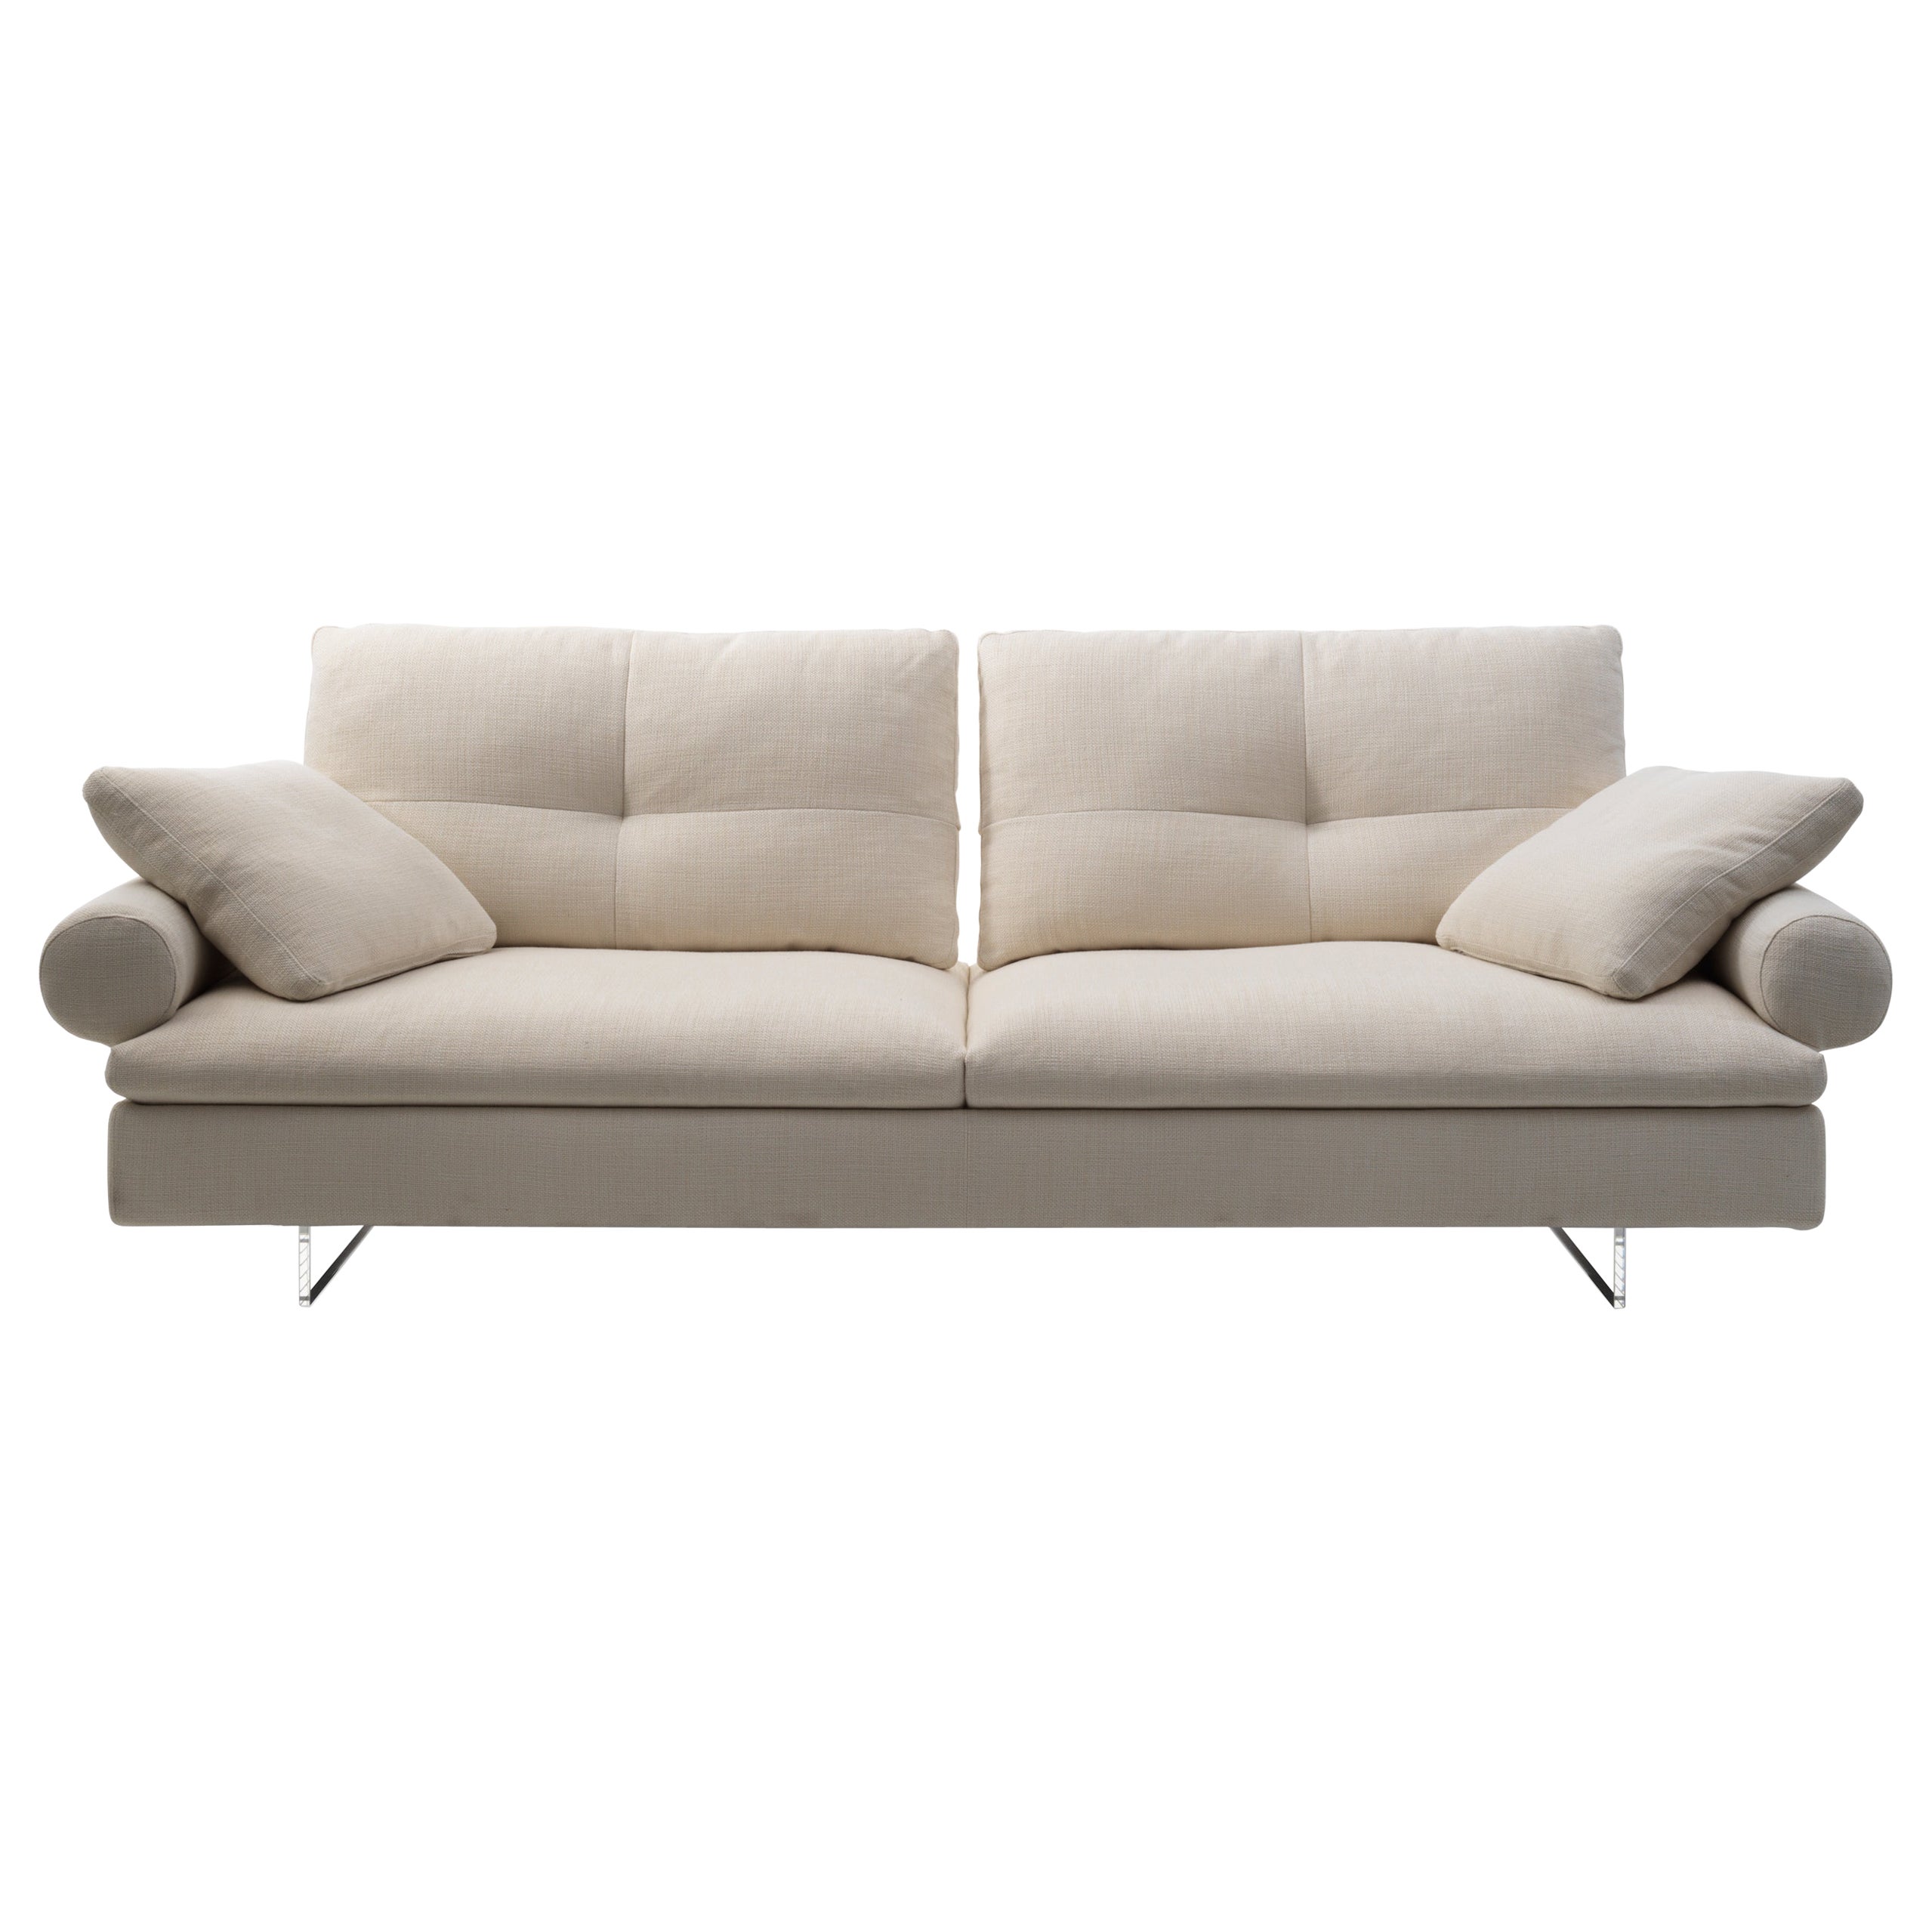 Limes New 80 Large Sofa in Beige Upholstery with Roll Armrest by Sergio Bicego